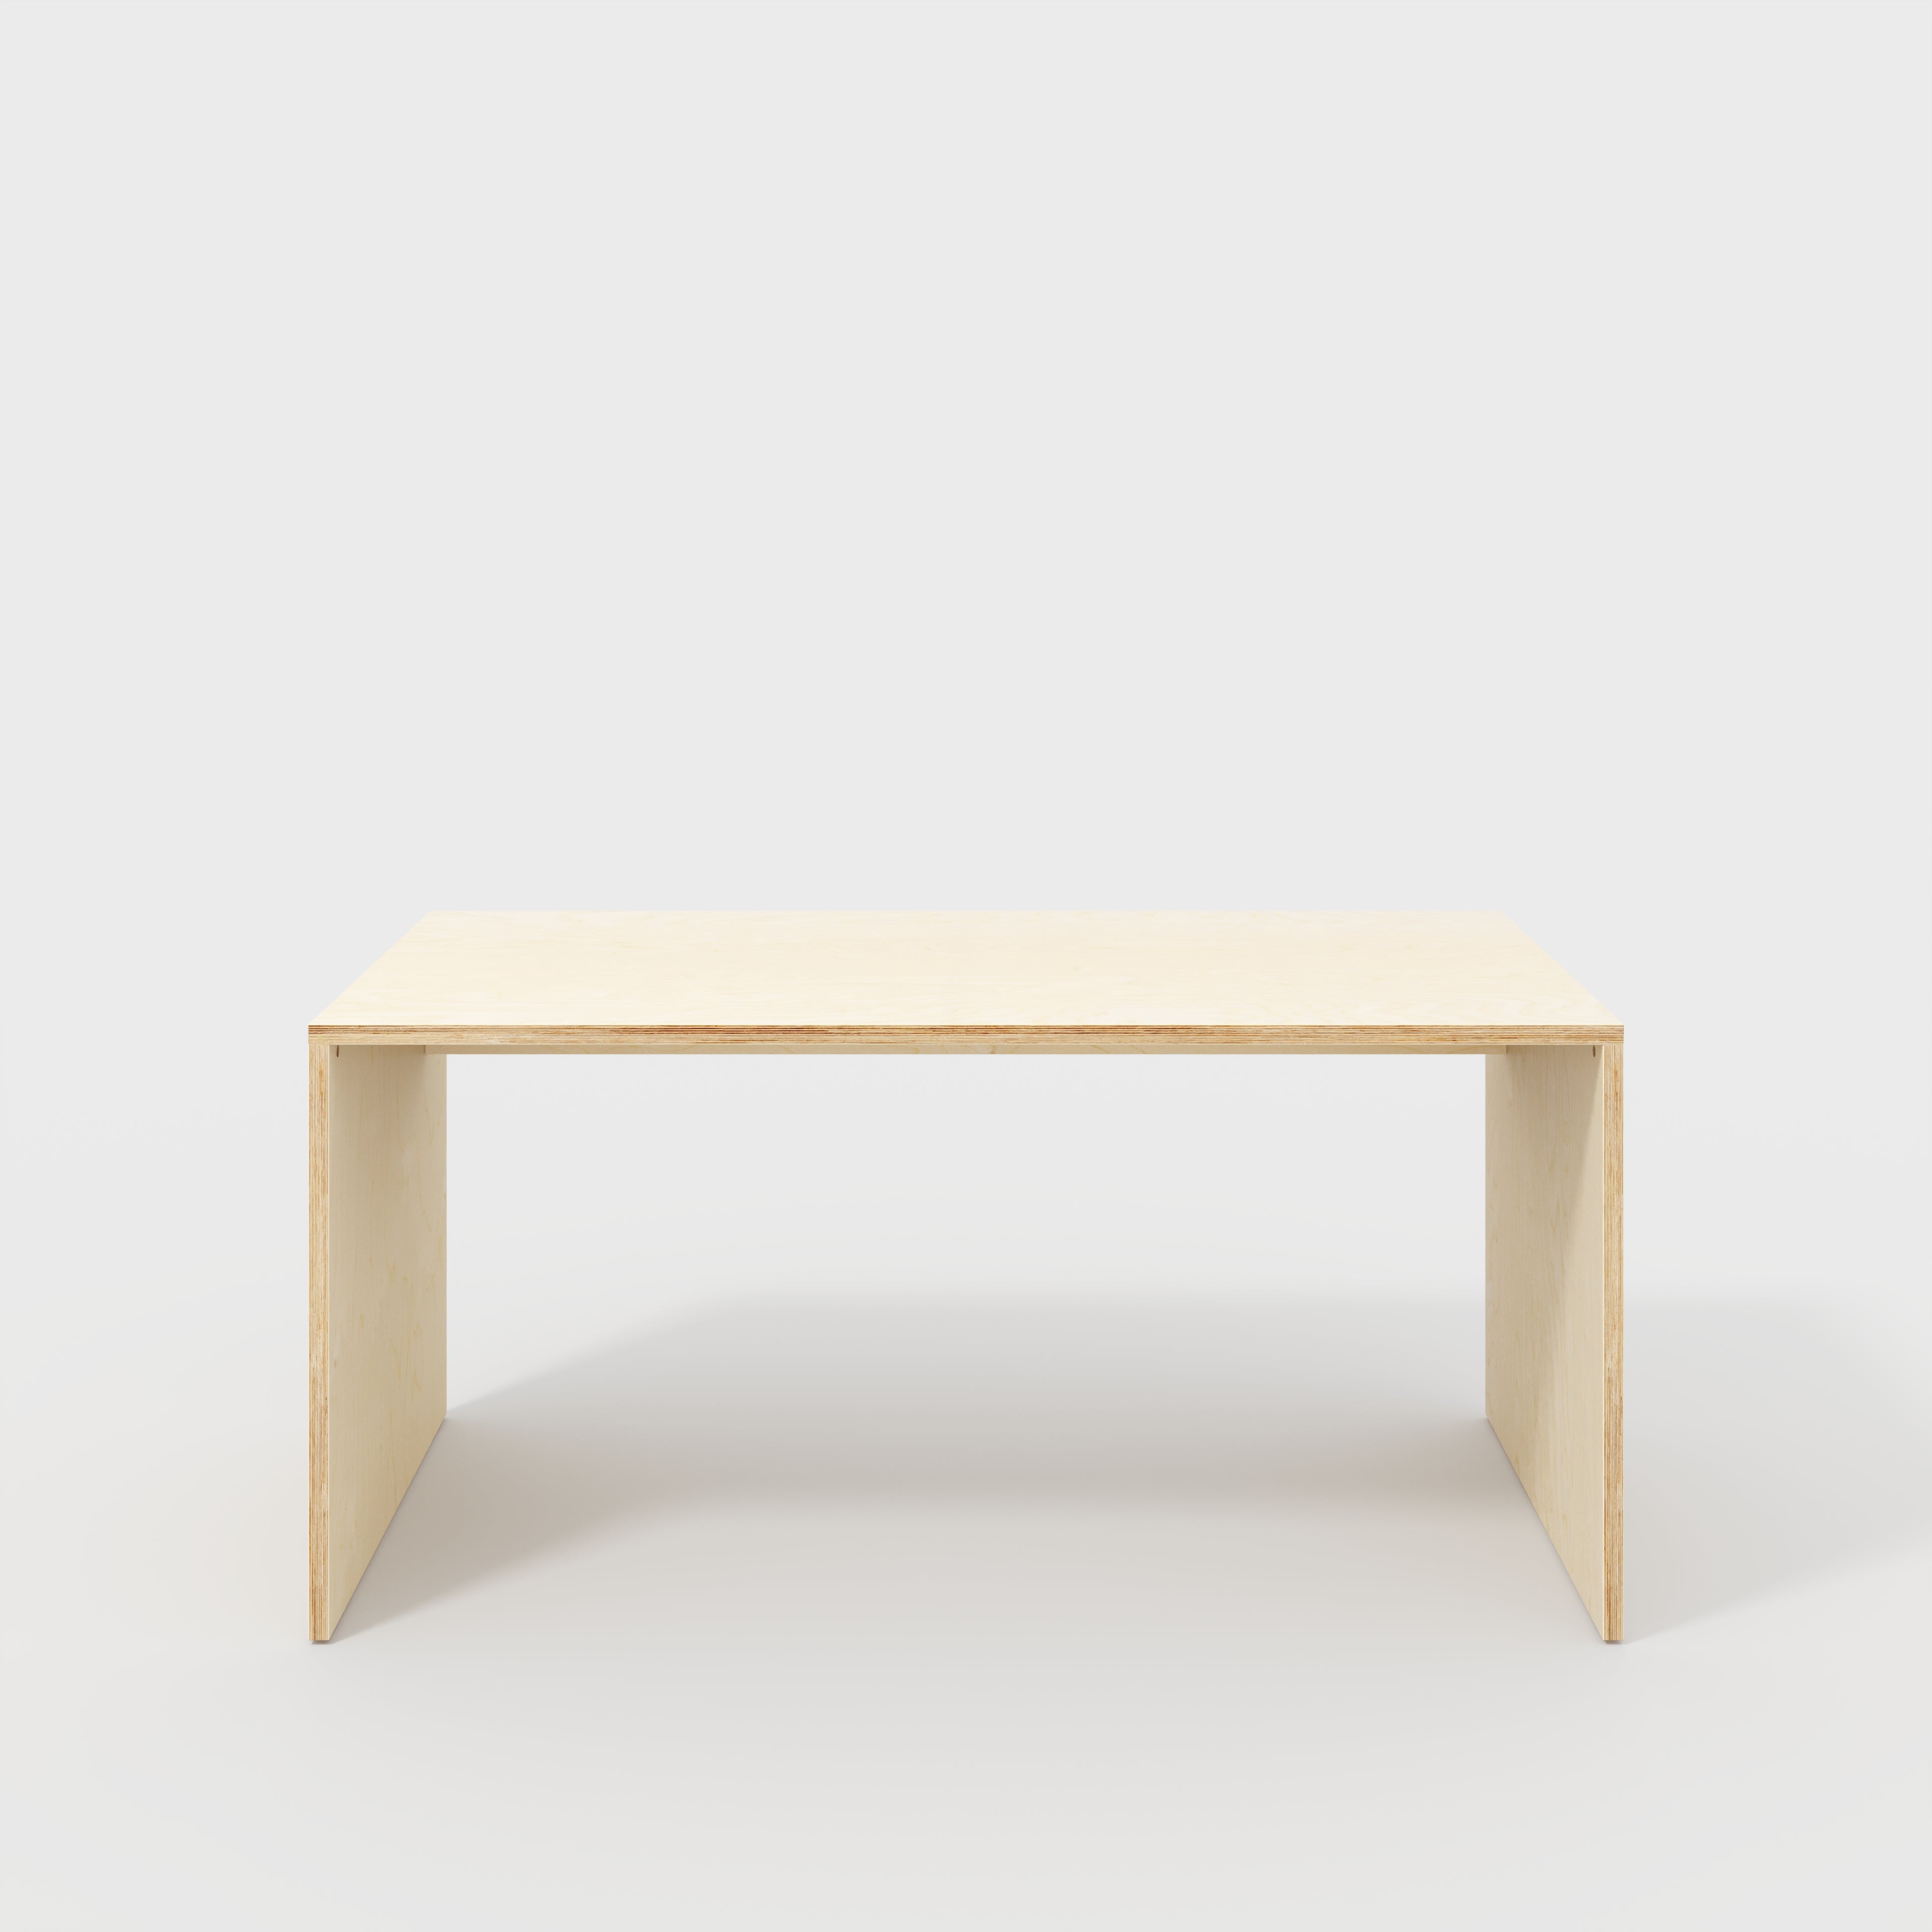 Desk with Solid Sides - Plywood Birch - 1600(w) x 800(d) x 750(h)